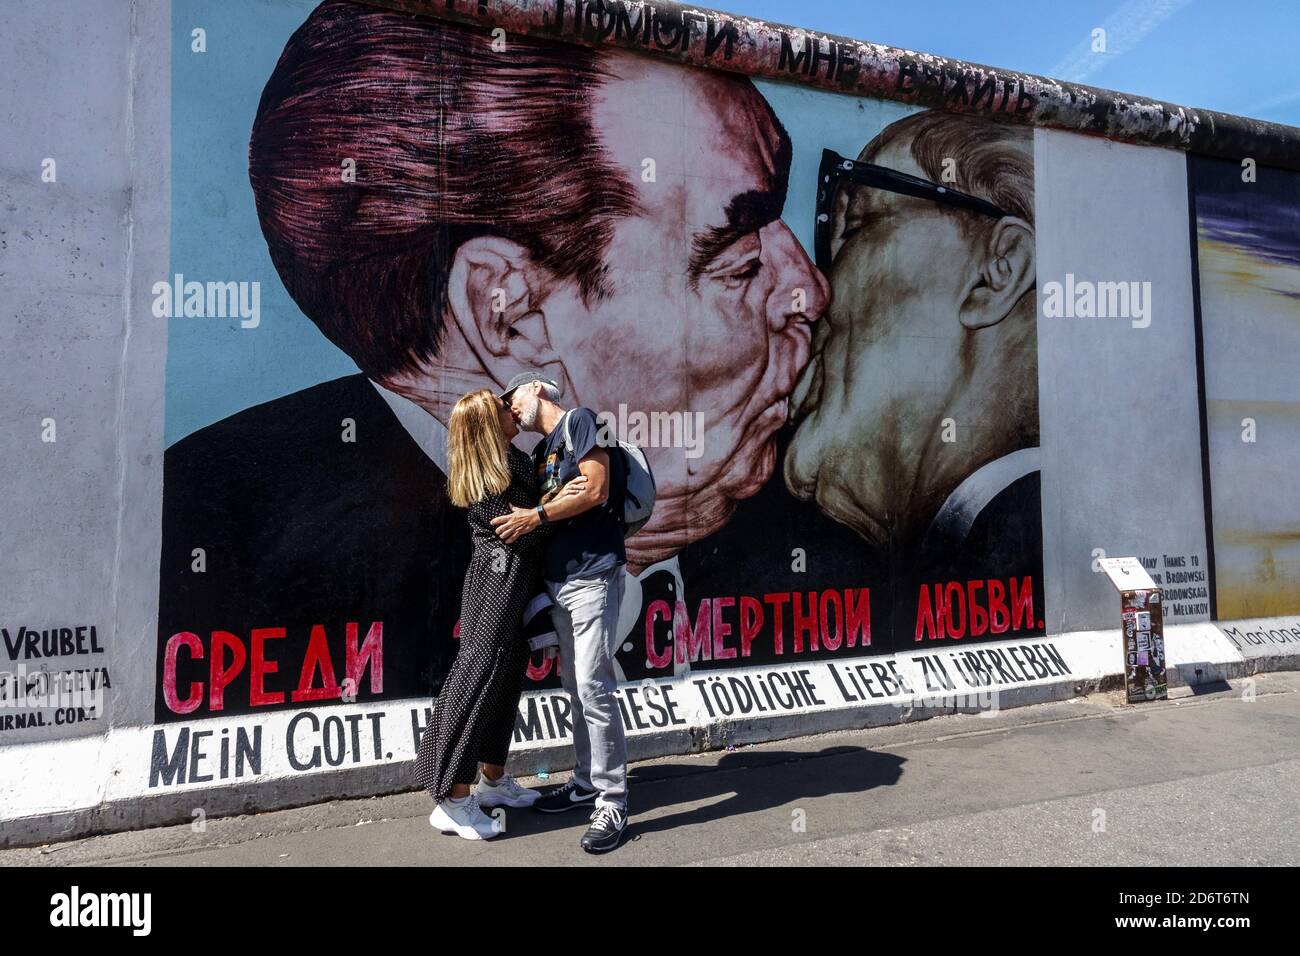 Graffiti Alamy kissing hi-res - photography stock and images